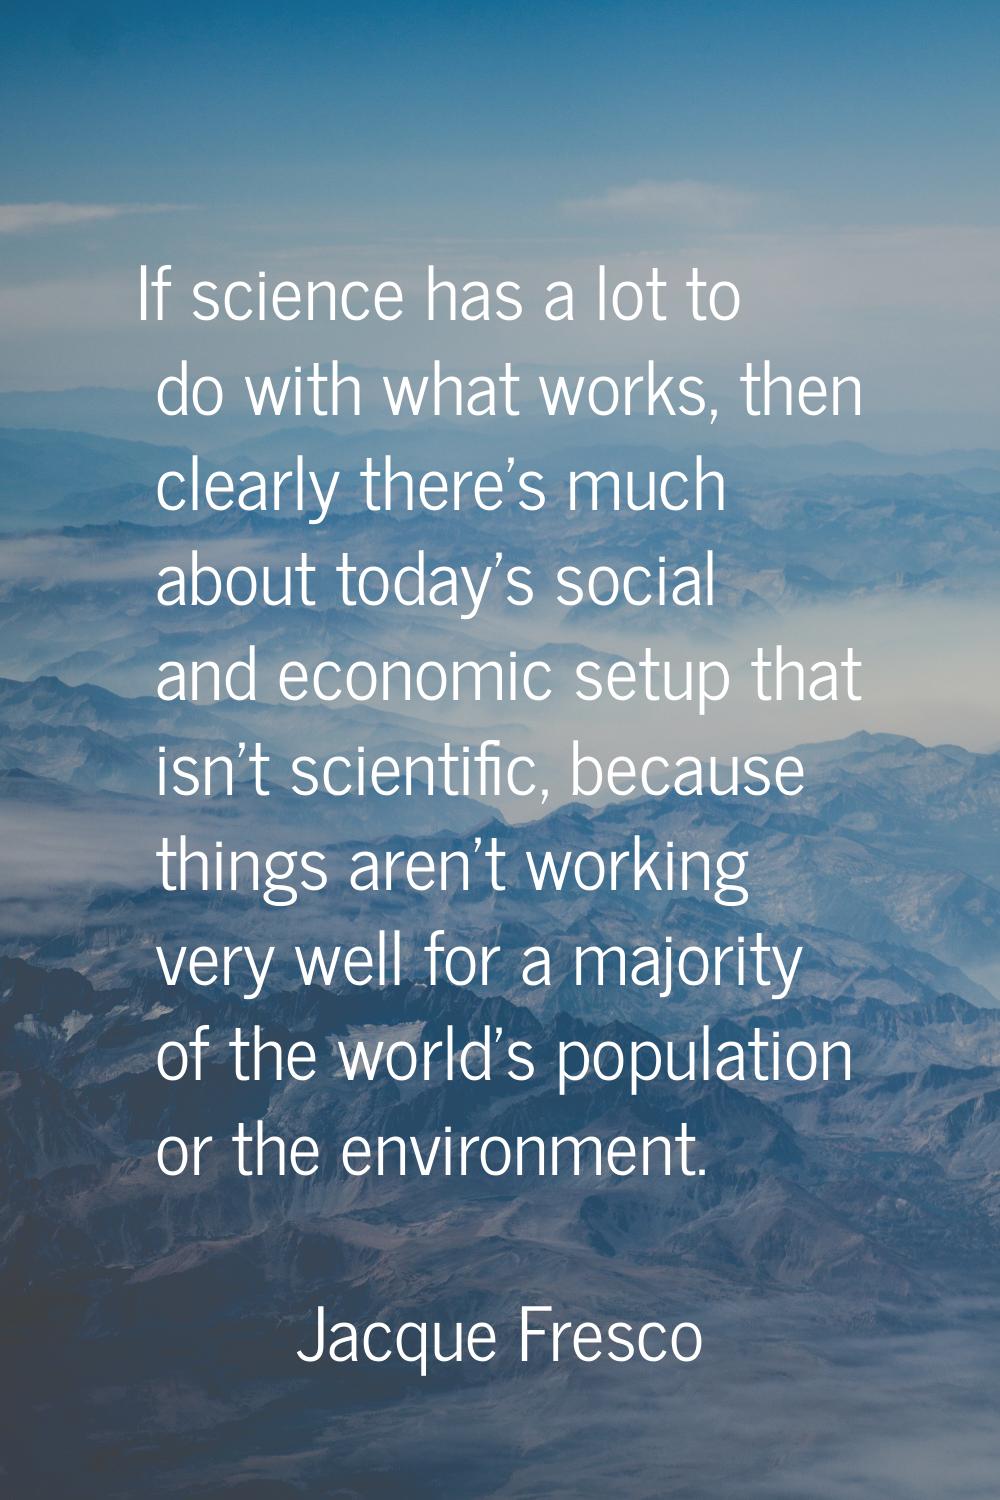 If science has a lot to do with what works, then clearly there's much about today's social and econ